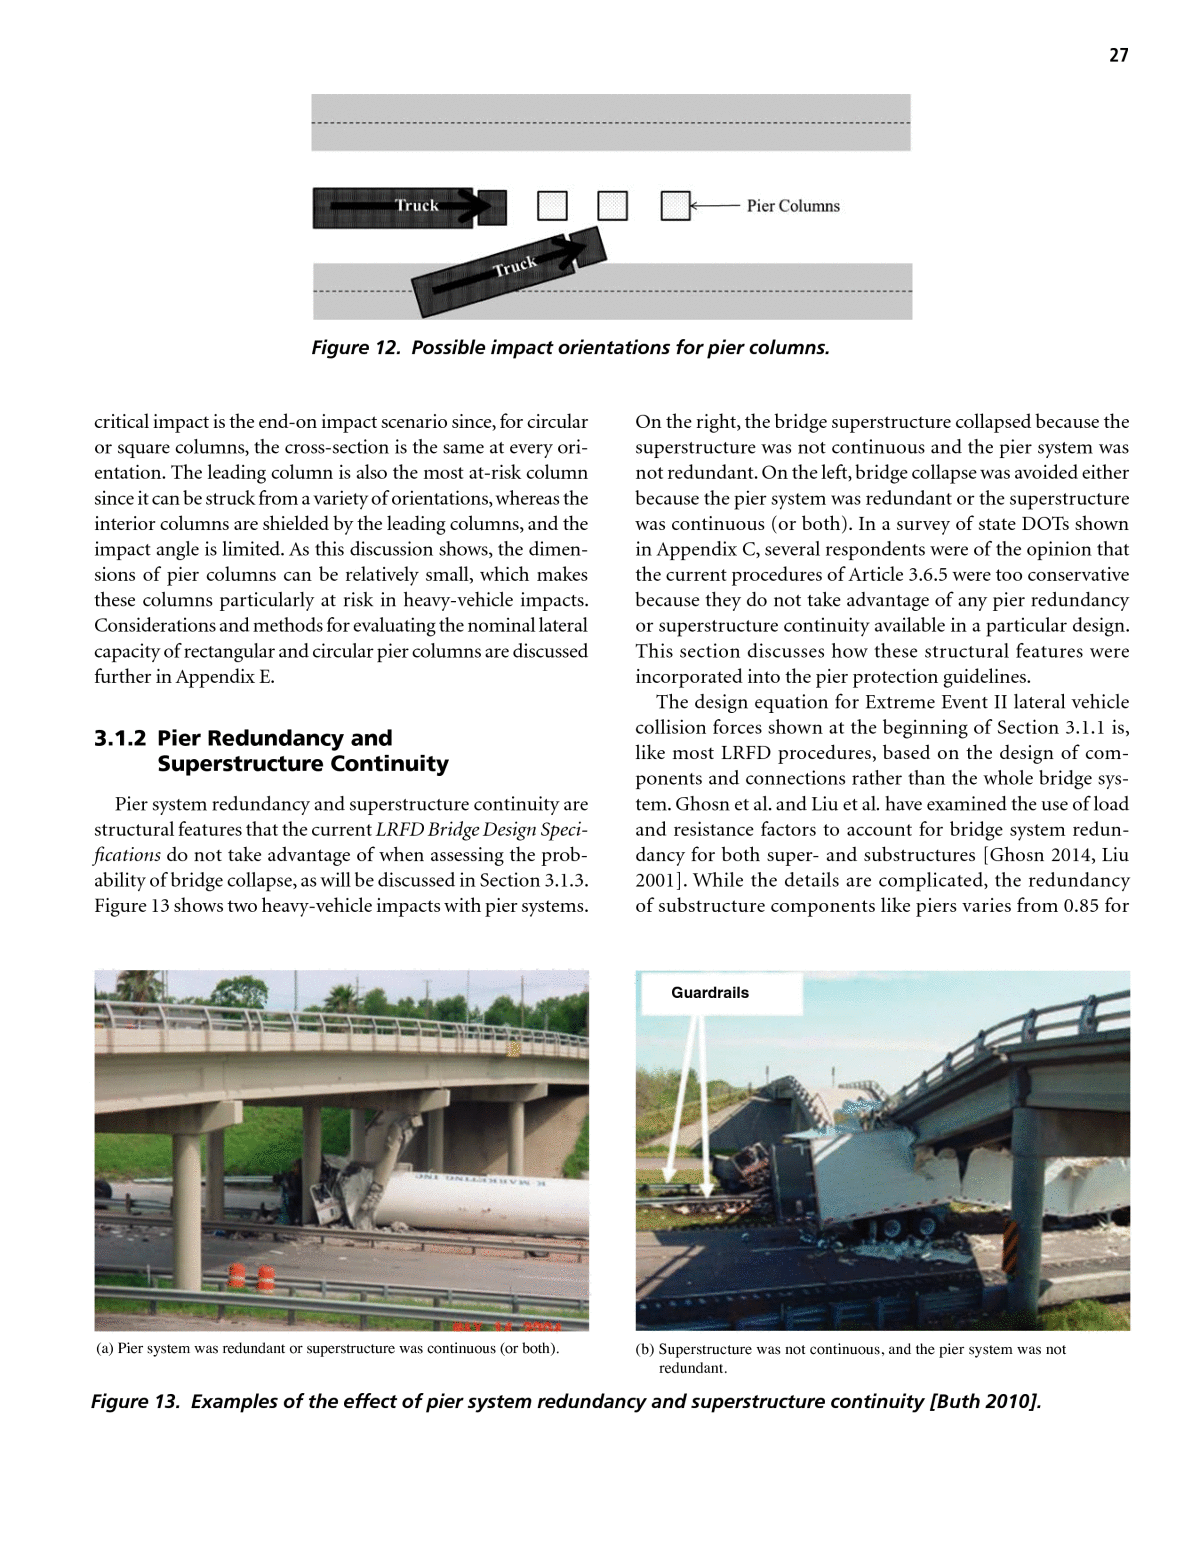 Chapter 3 - Discussion of Proposed LRFD Bridge Design Pier